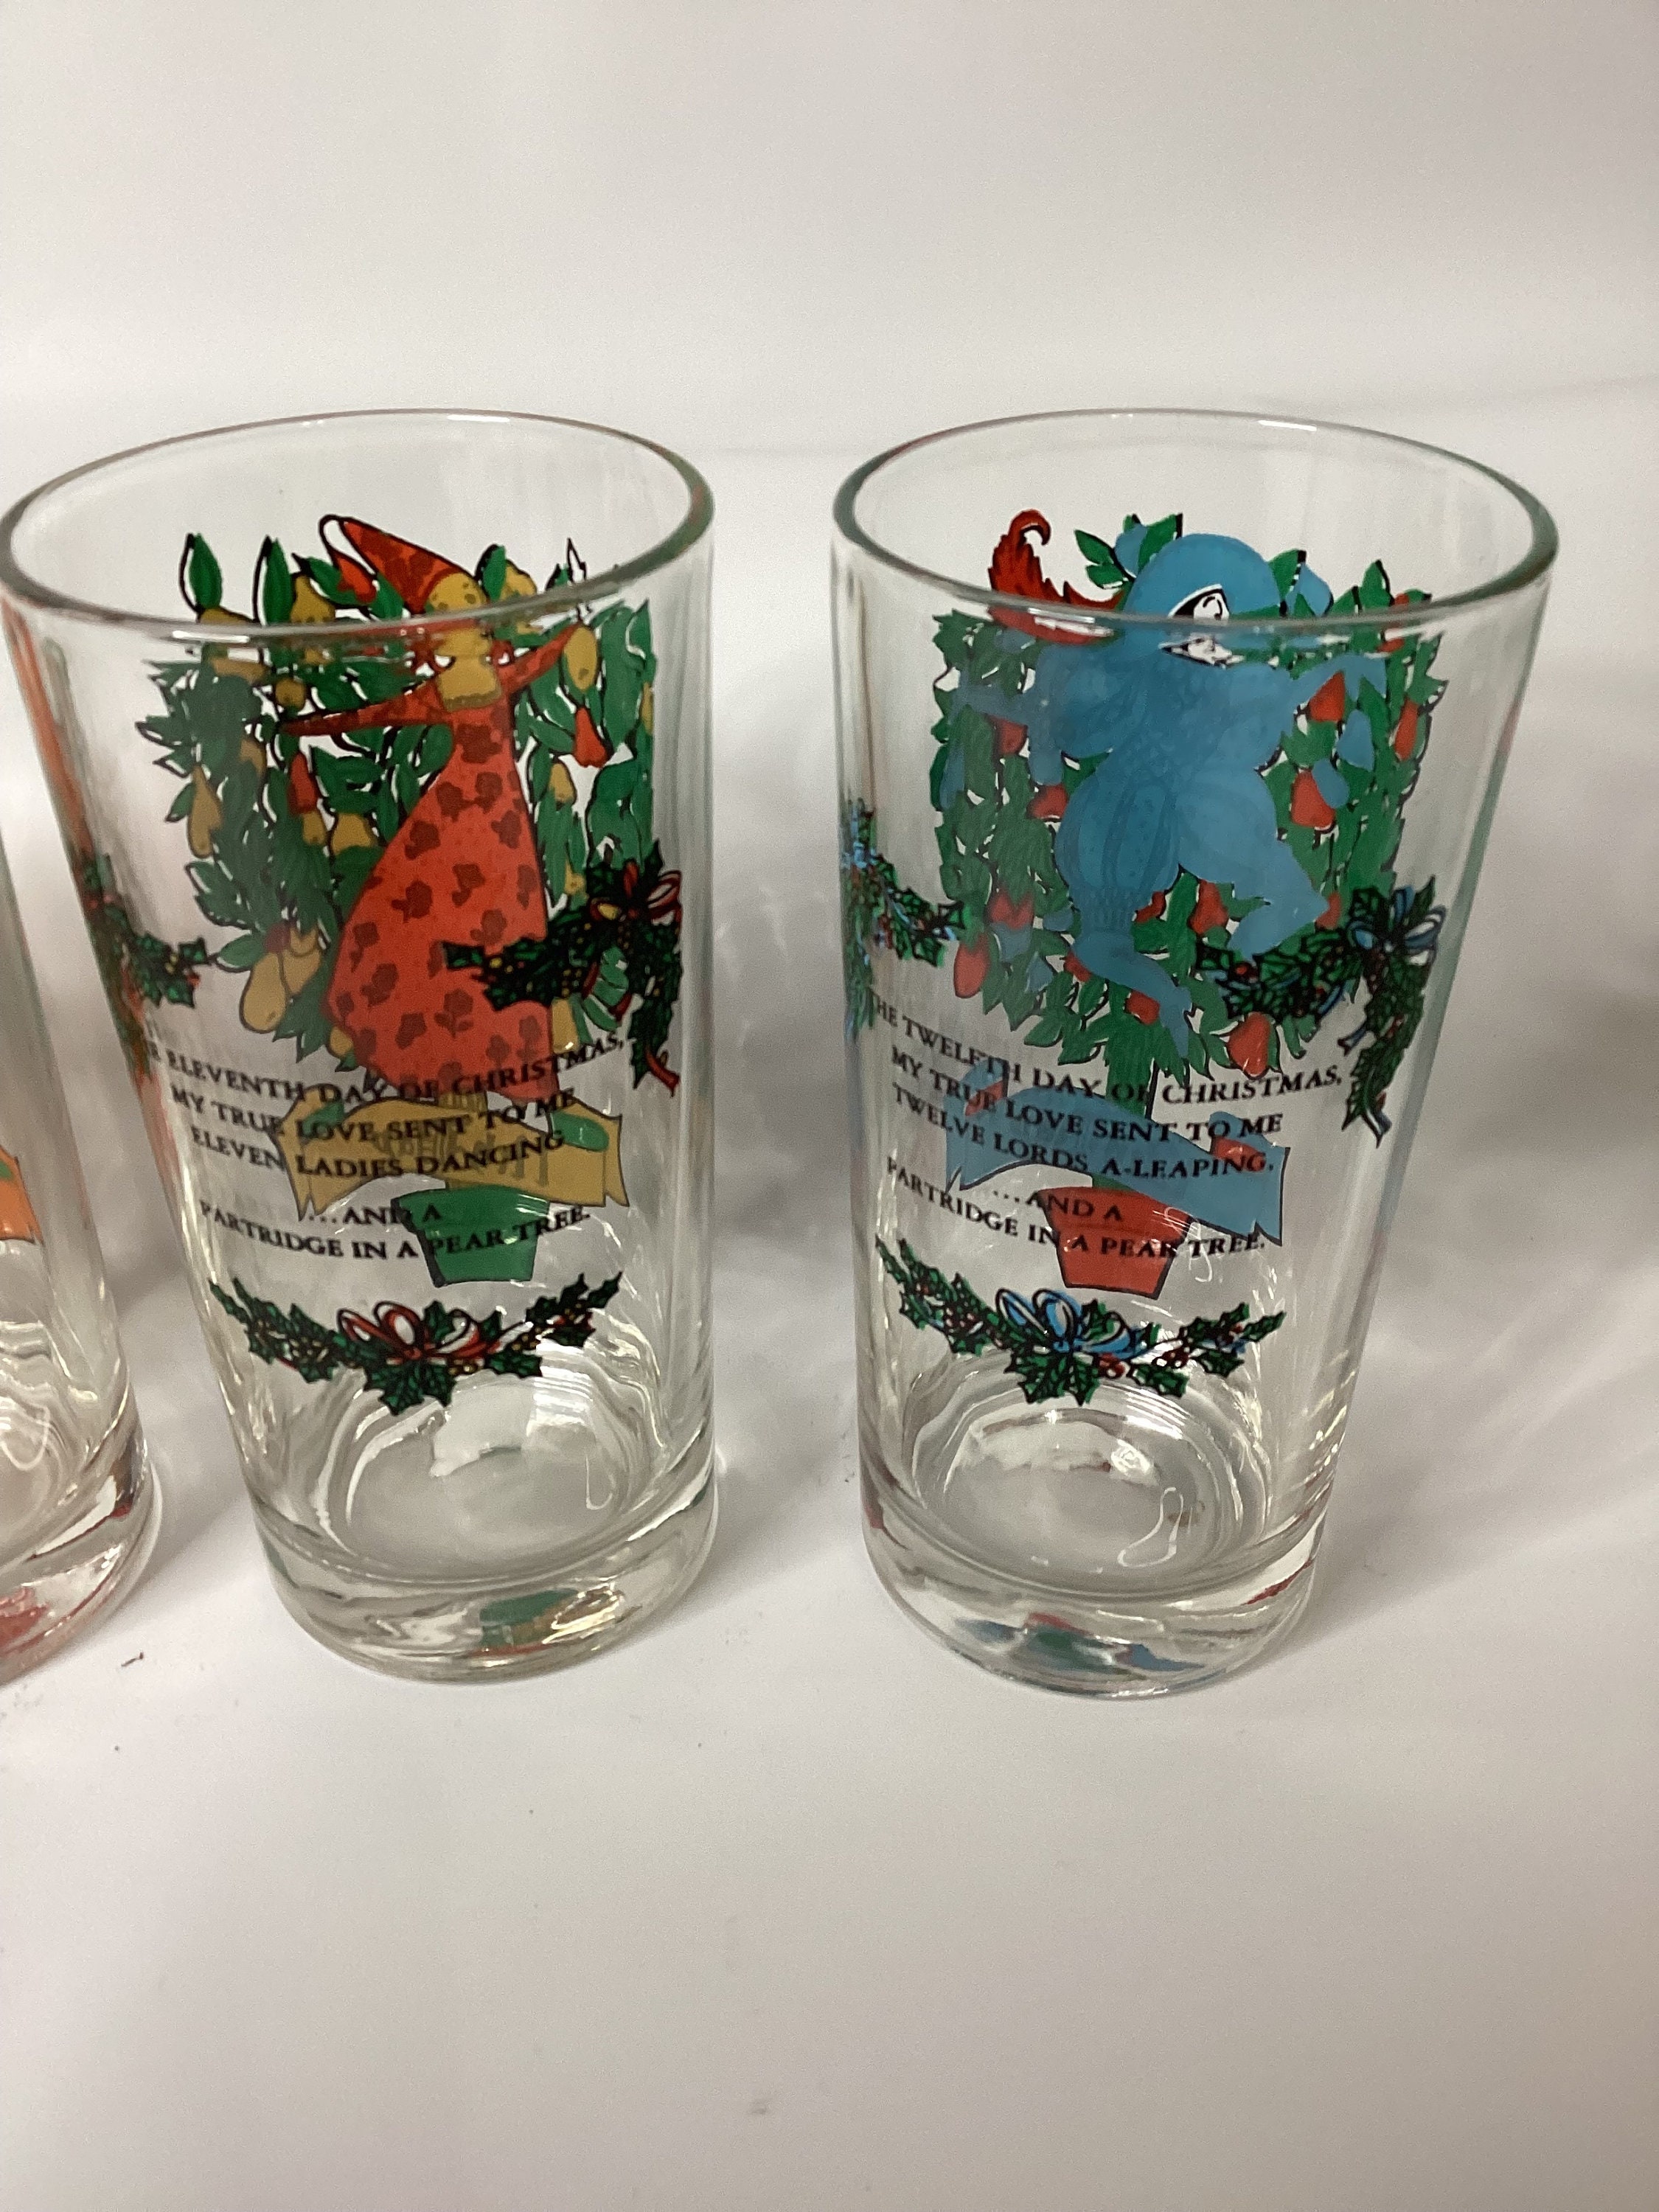 12 Days of Christmas Anchor Hocking set of drinking glasses, vintage  holiday tableware